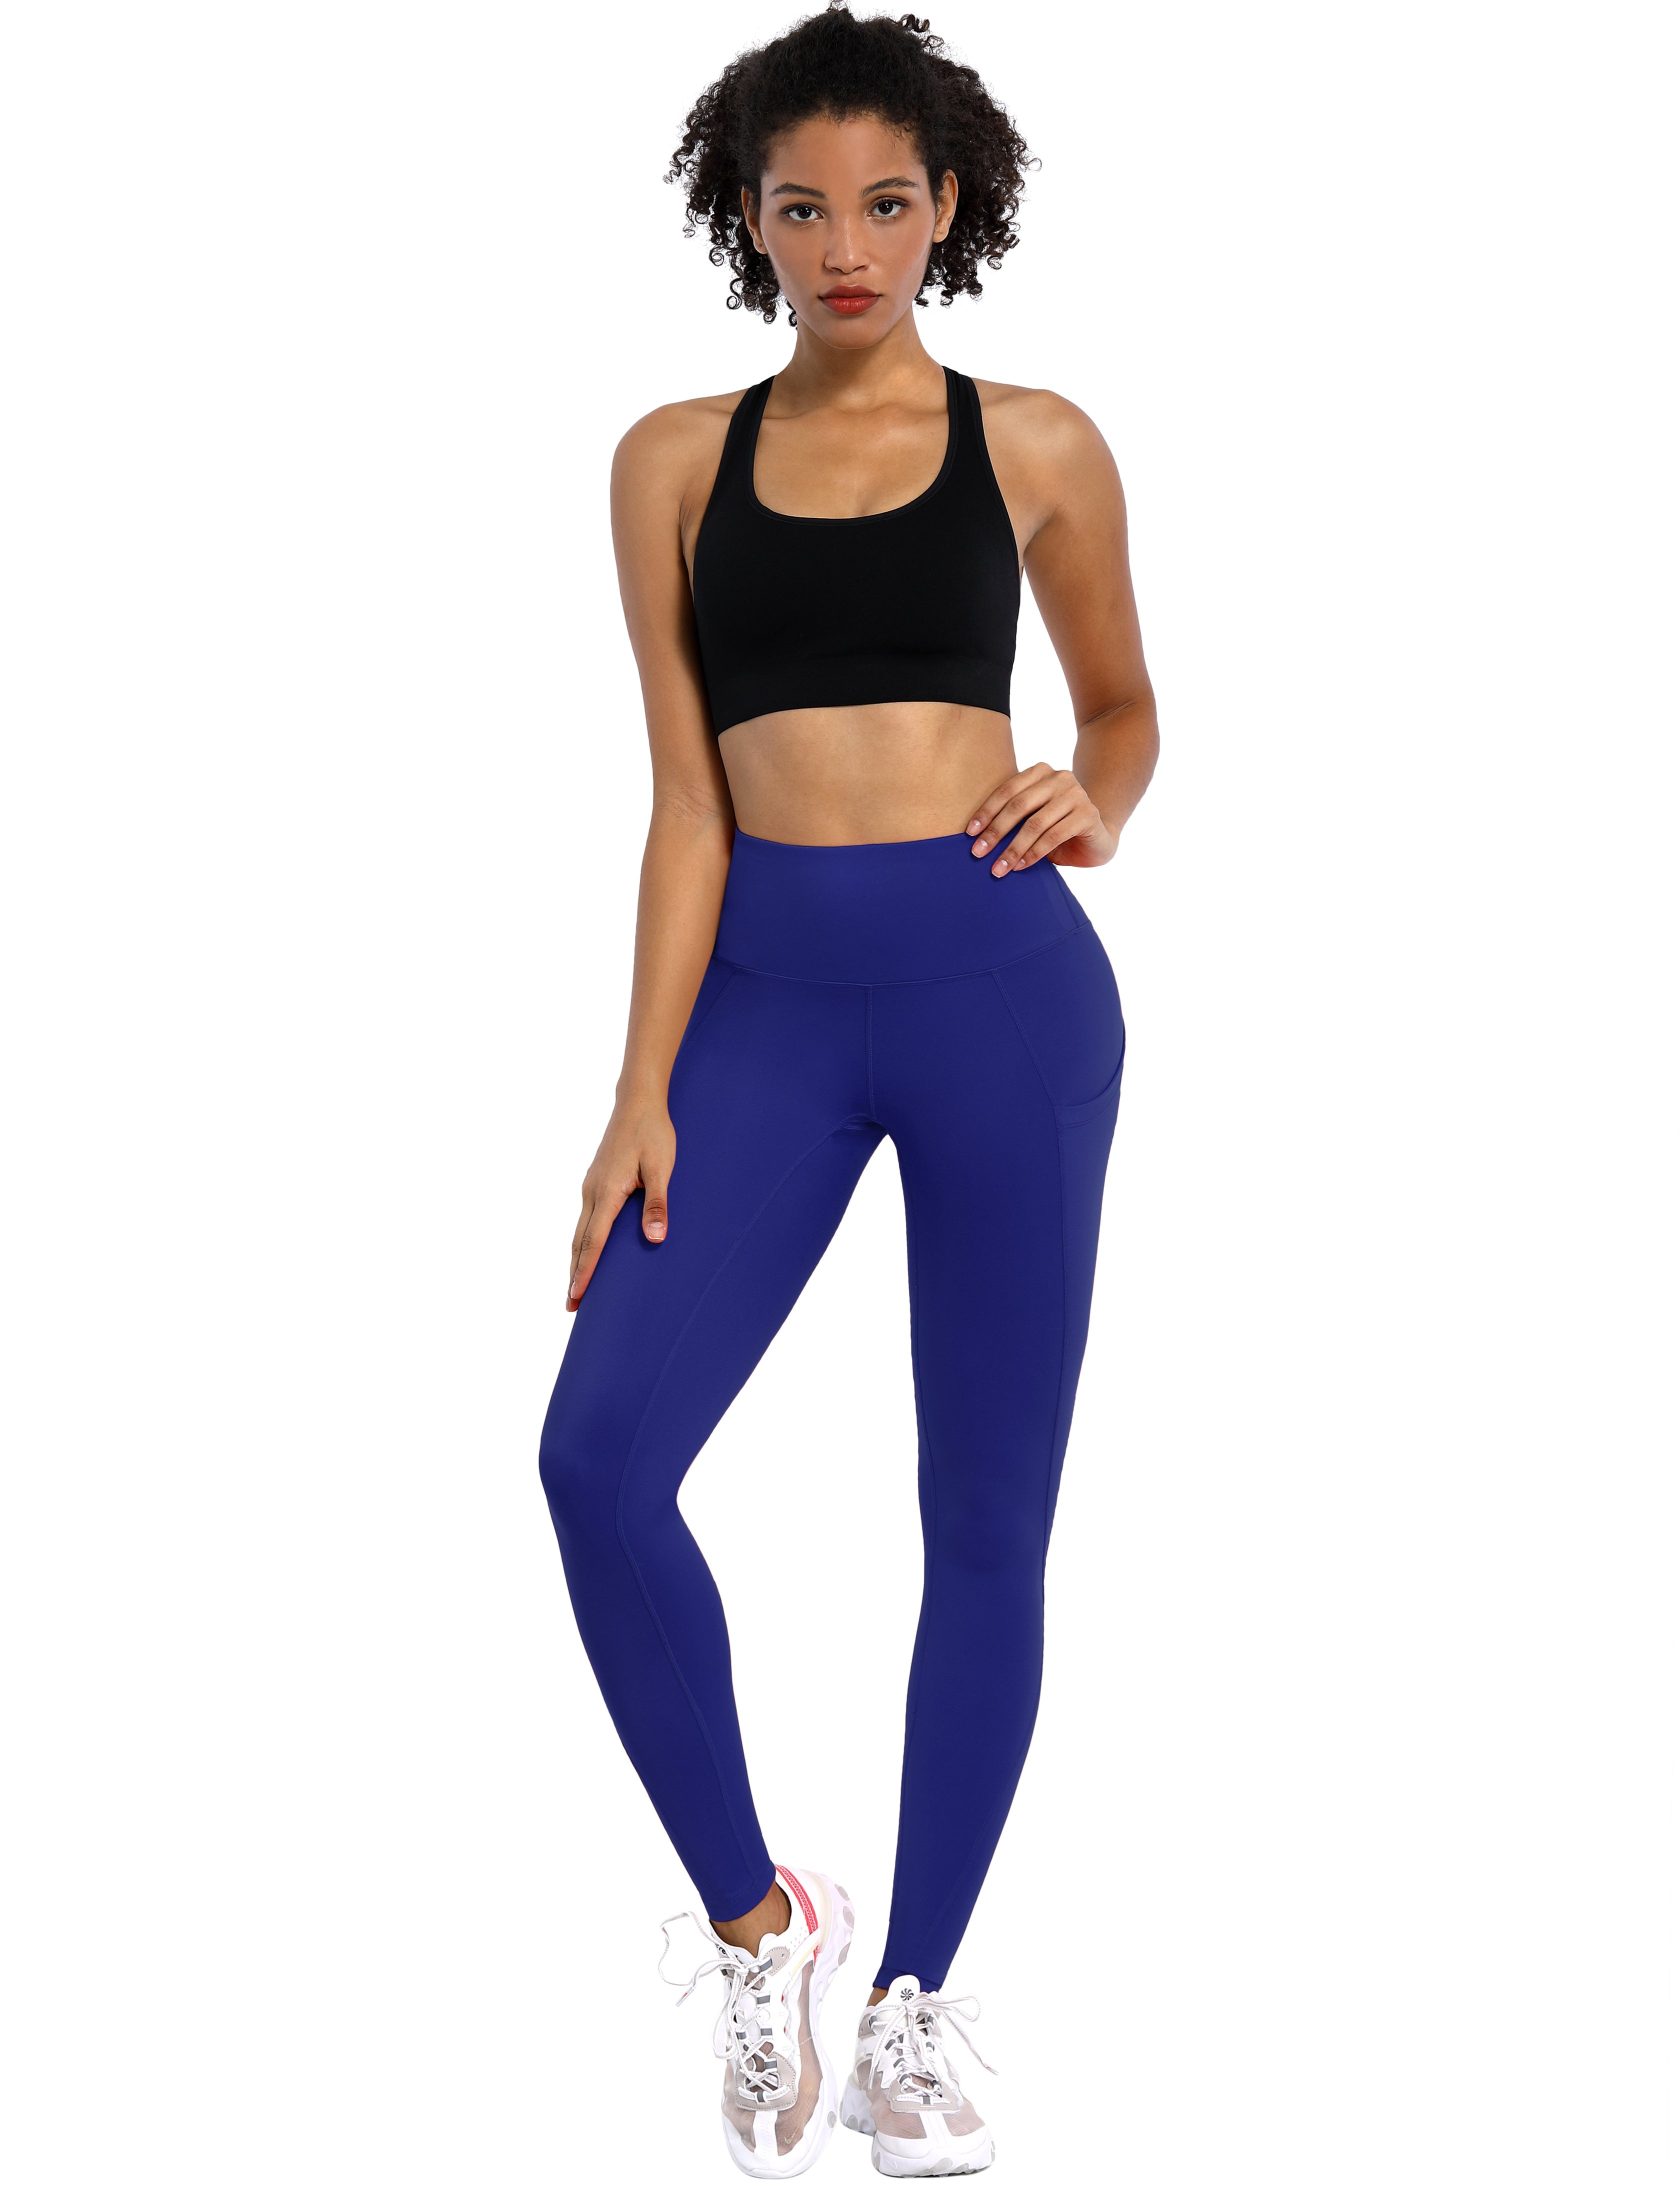 High Waist Side Pockets Running Pants navy 75% Nylon, 25% Spandex Fabric doesn't attract lint easily 4-way stretch No see-through Moisture-wicking Tummy control Inner pocket